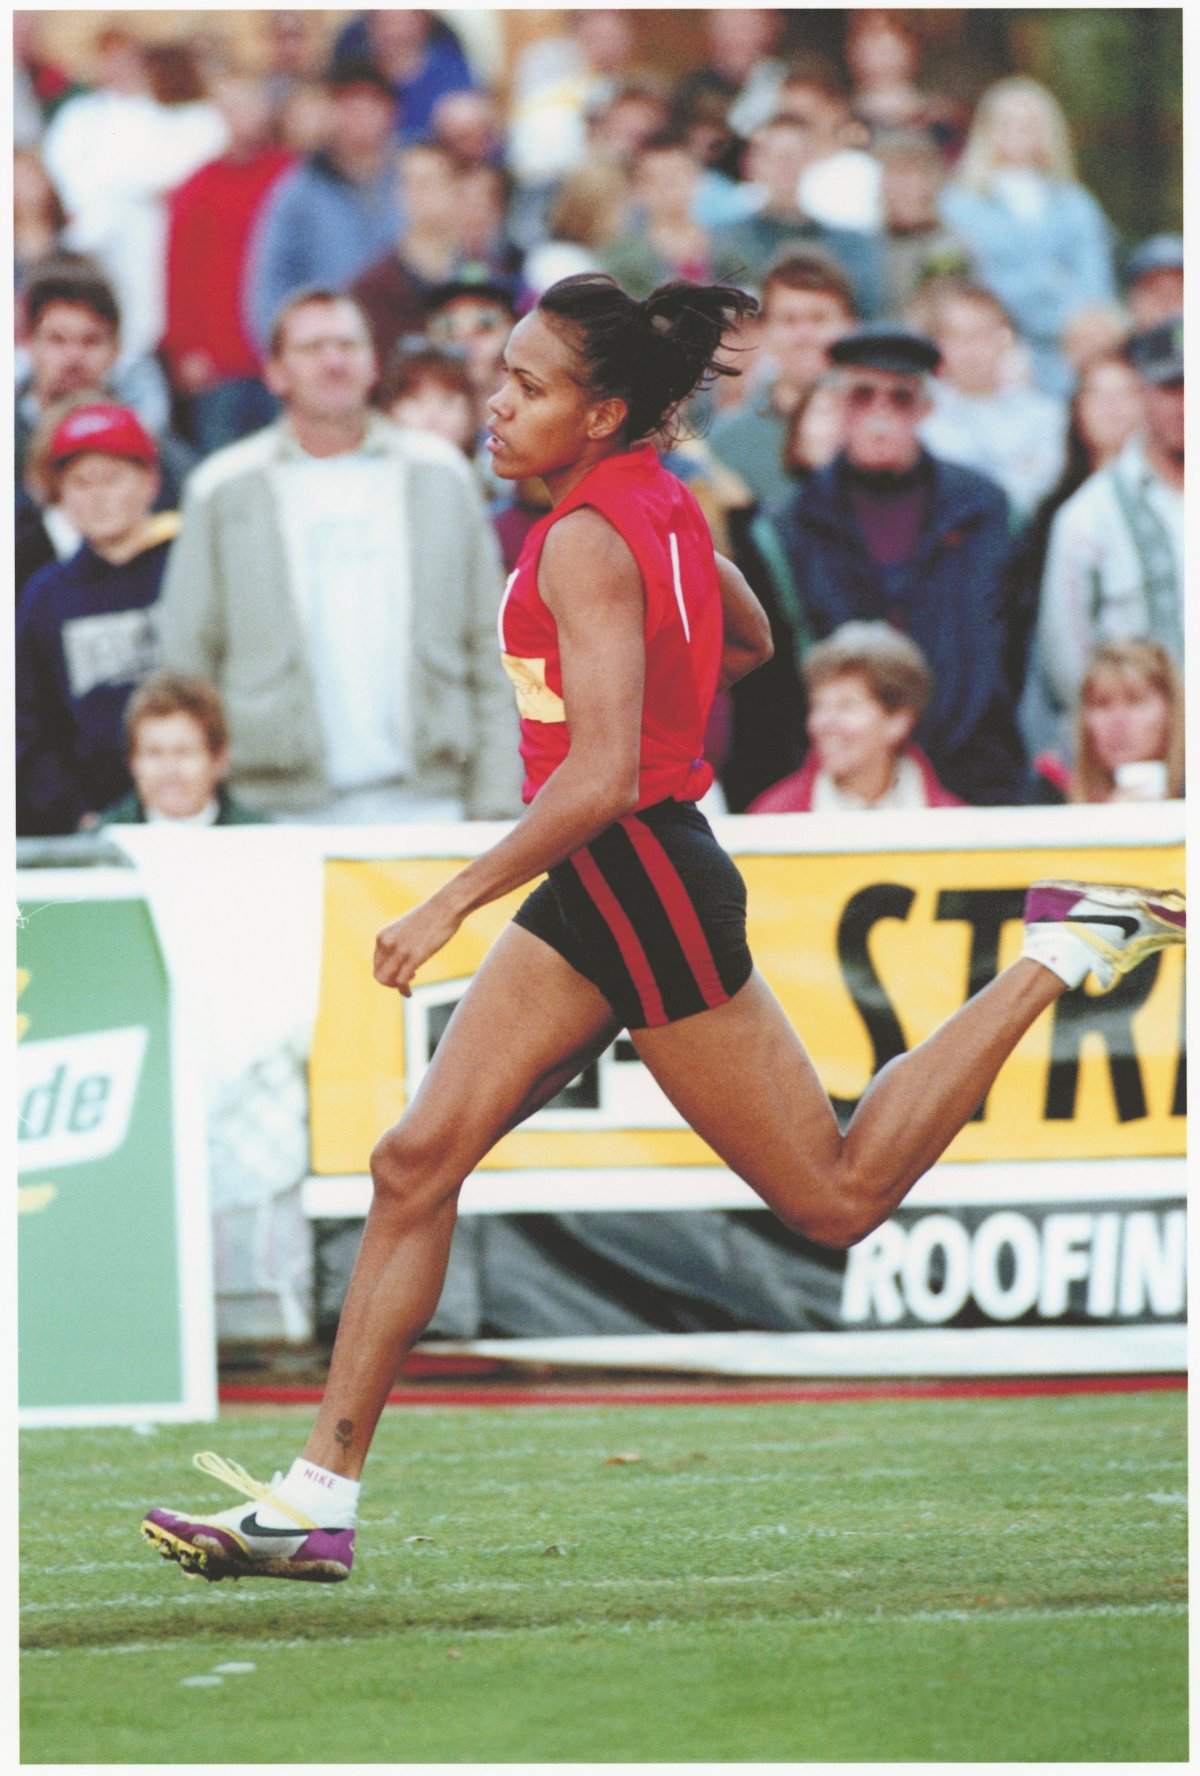 Photo of Cathy Freeman running in front of a crowd at a sport stadium